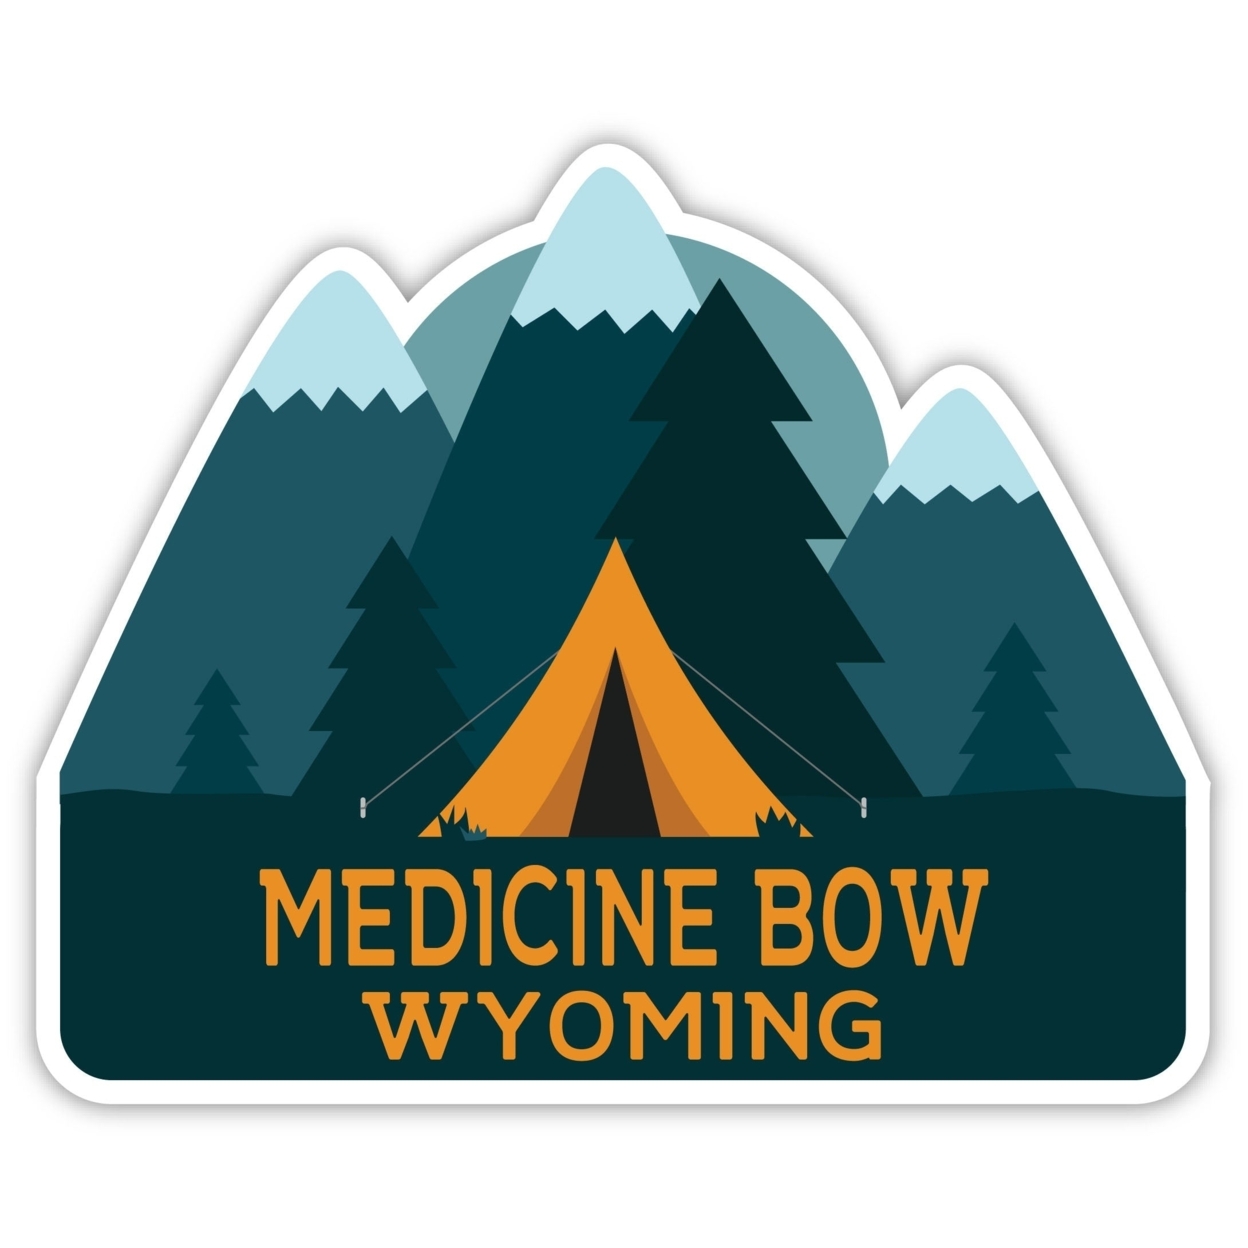 Medicine Bow Wyoming Souvenir Decorative Stickers (Choose Theme And Size) - 2-Inch, Adventures Awaits